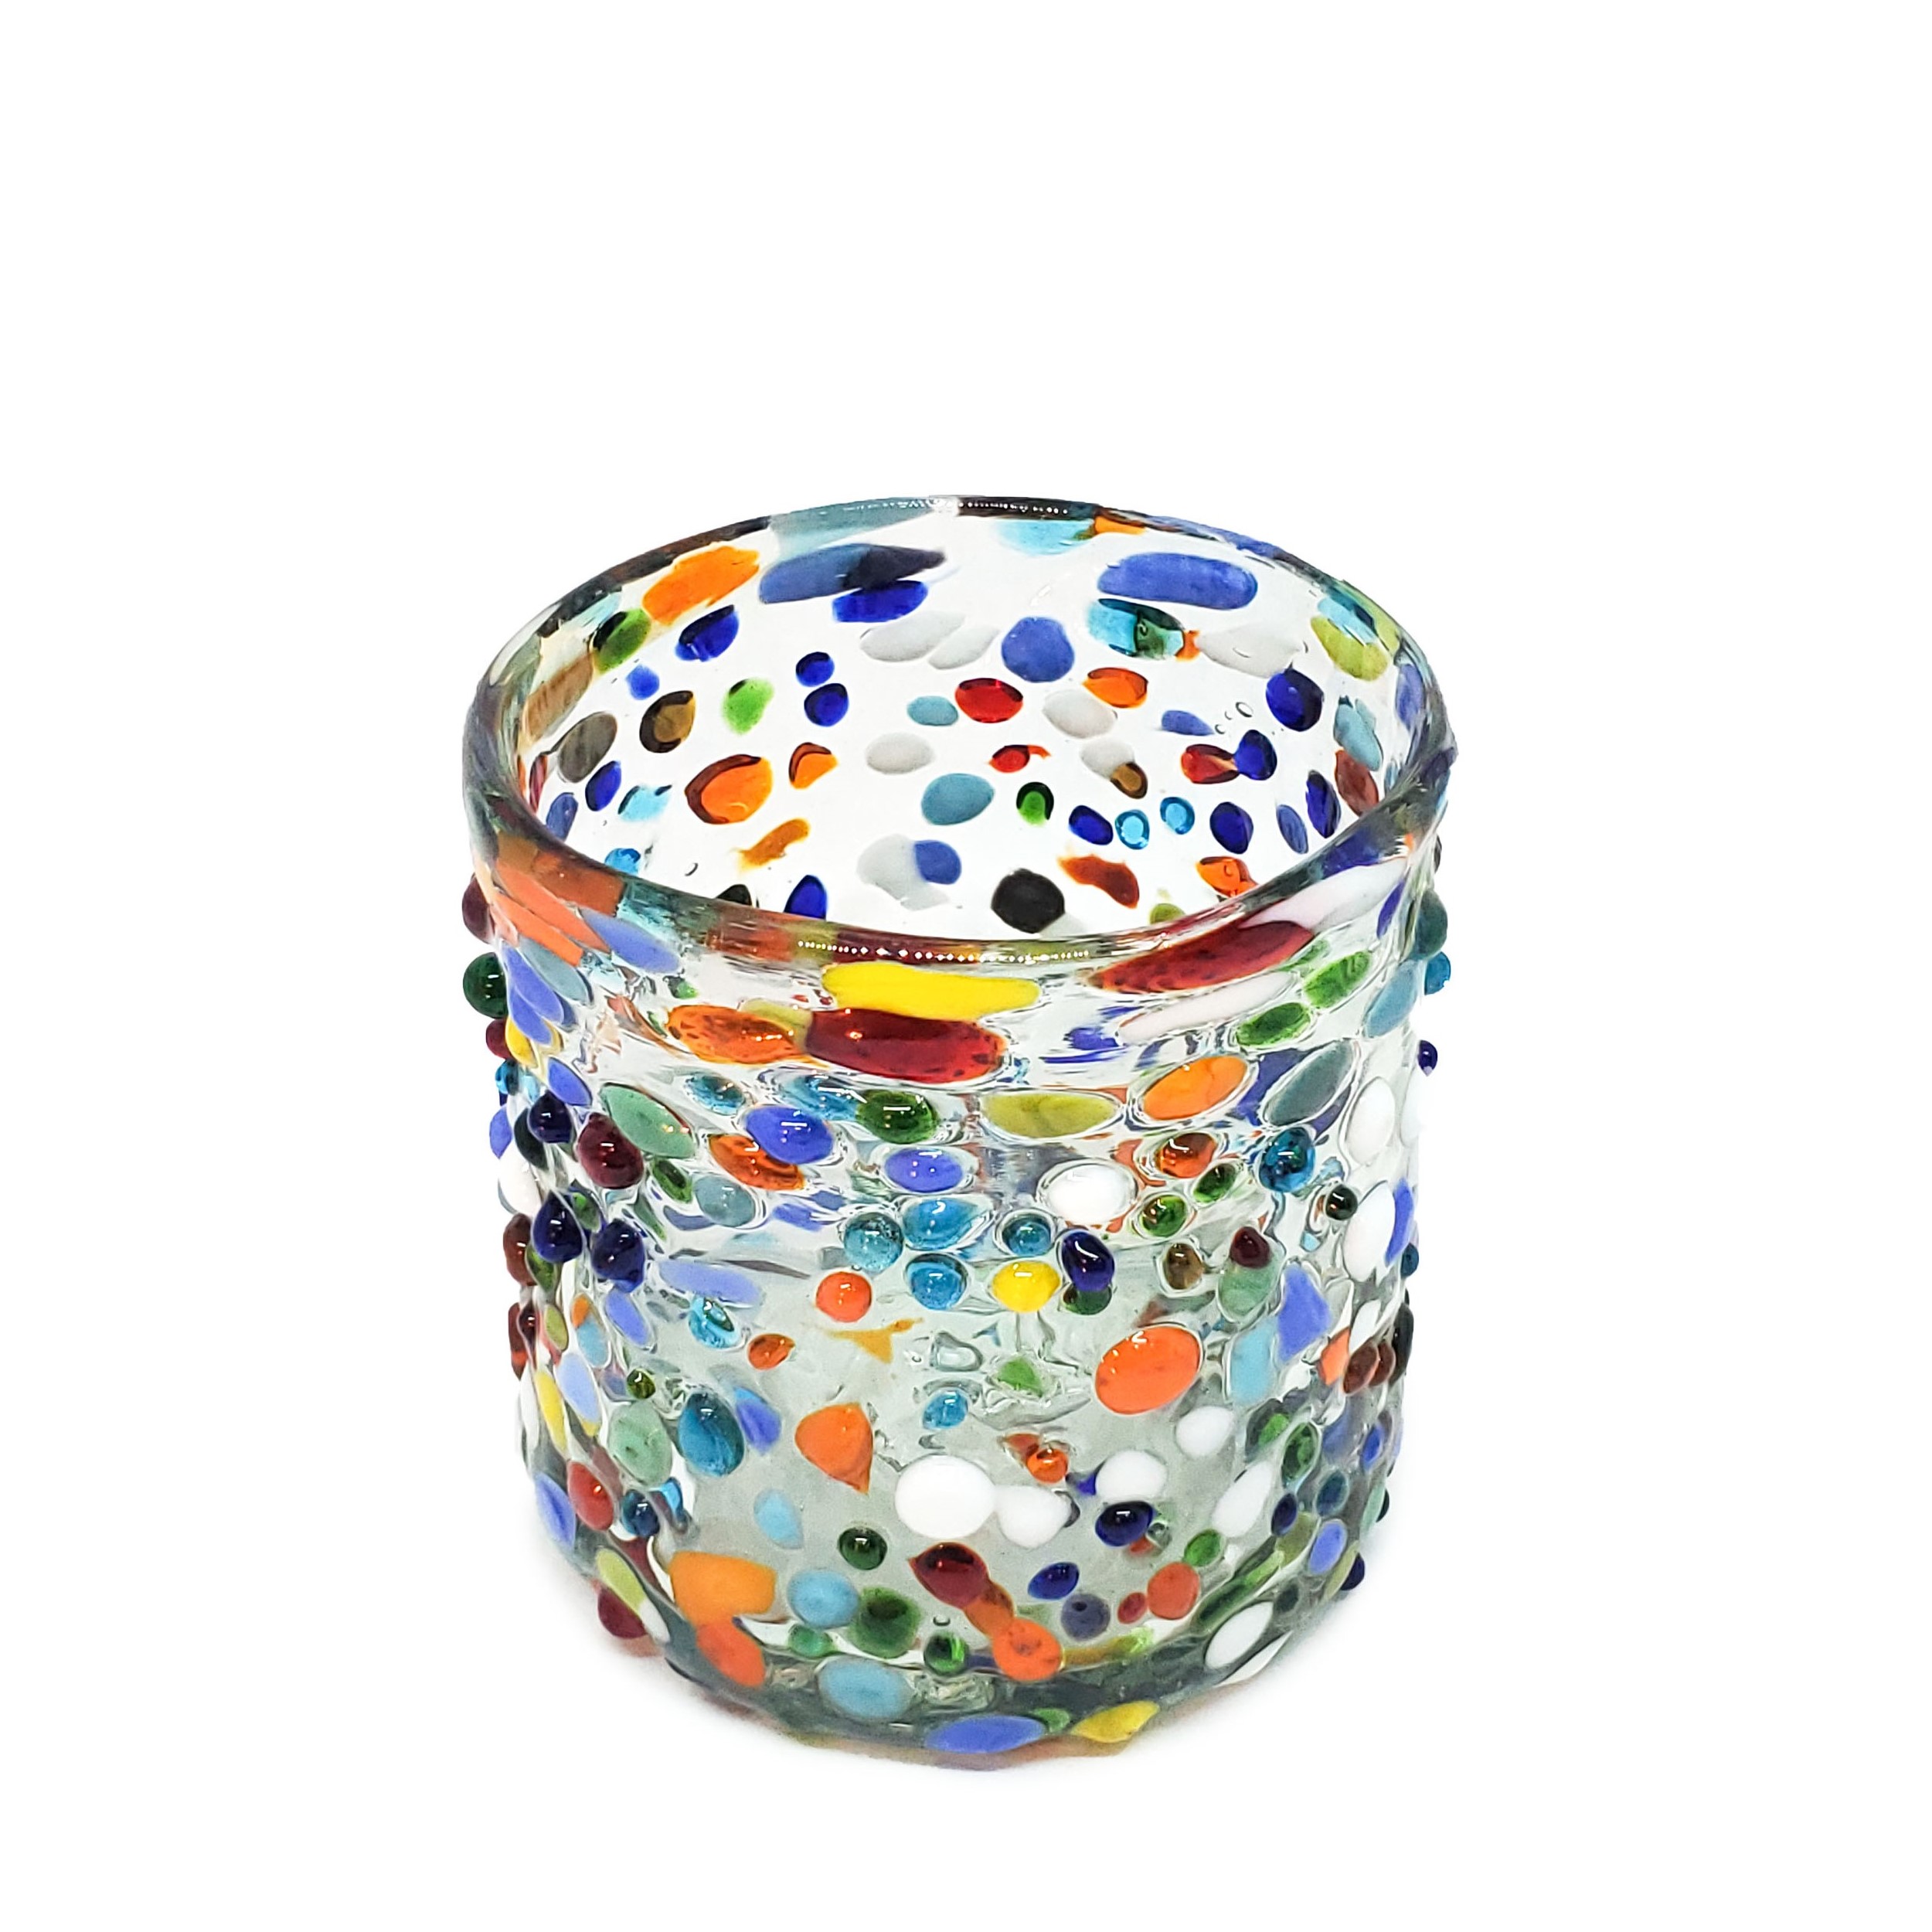 Wholesale MEXICAN GLASSWARE / Confetti Rocks 8 oz DOF Rocks Glasses  / Let the spring come into your home with this colorful set of glasses. The multicolor glass rocks decoration makes them a standout in any place.